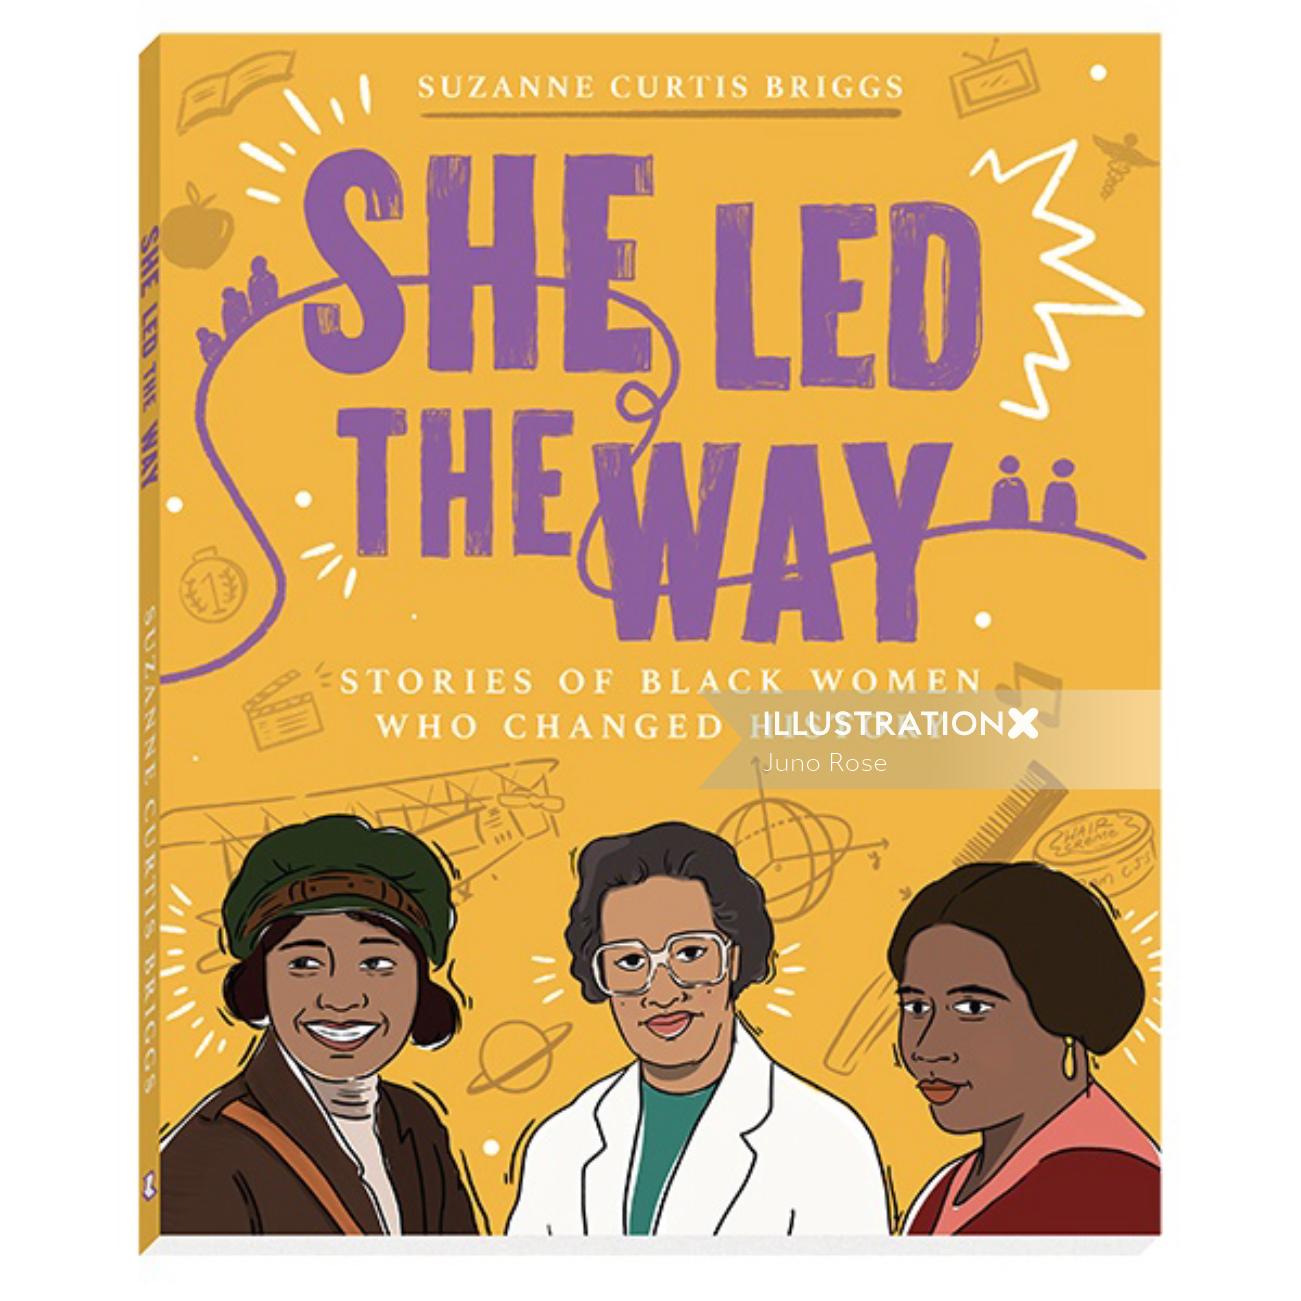 This is the cover art for "She Led the Way" book